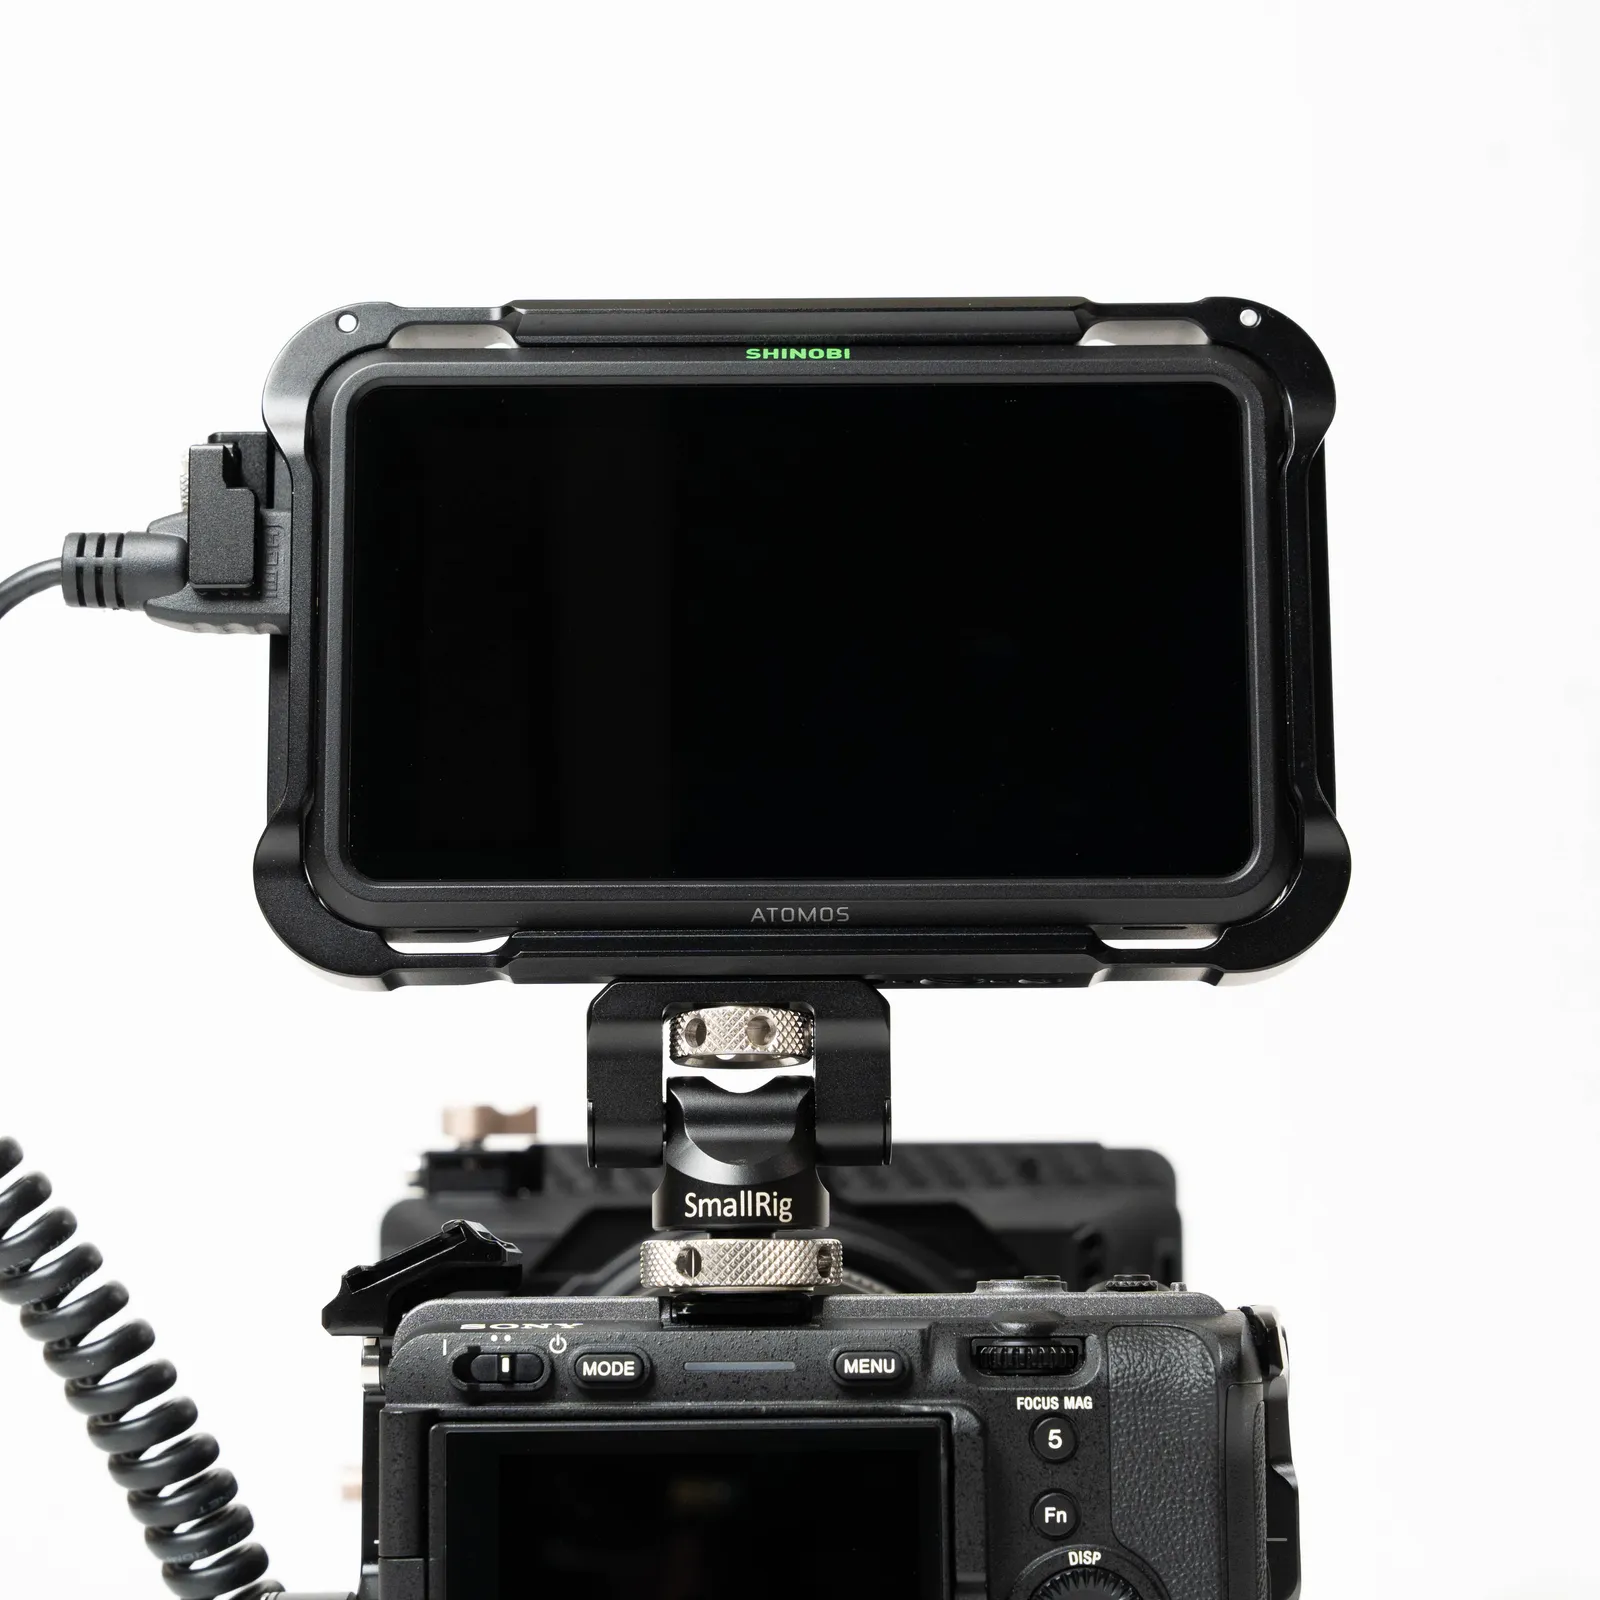 Atomos Shinobi 5.2" 4K HDMI Camera Monitor with Battery, Charger, Cables, Cage, Hood, and Mount